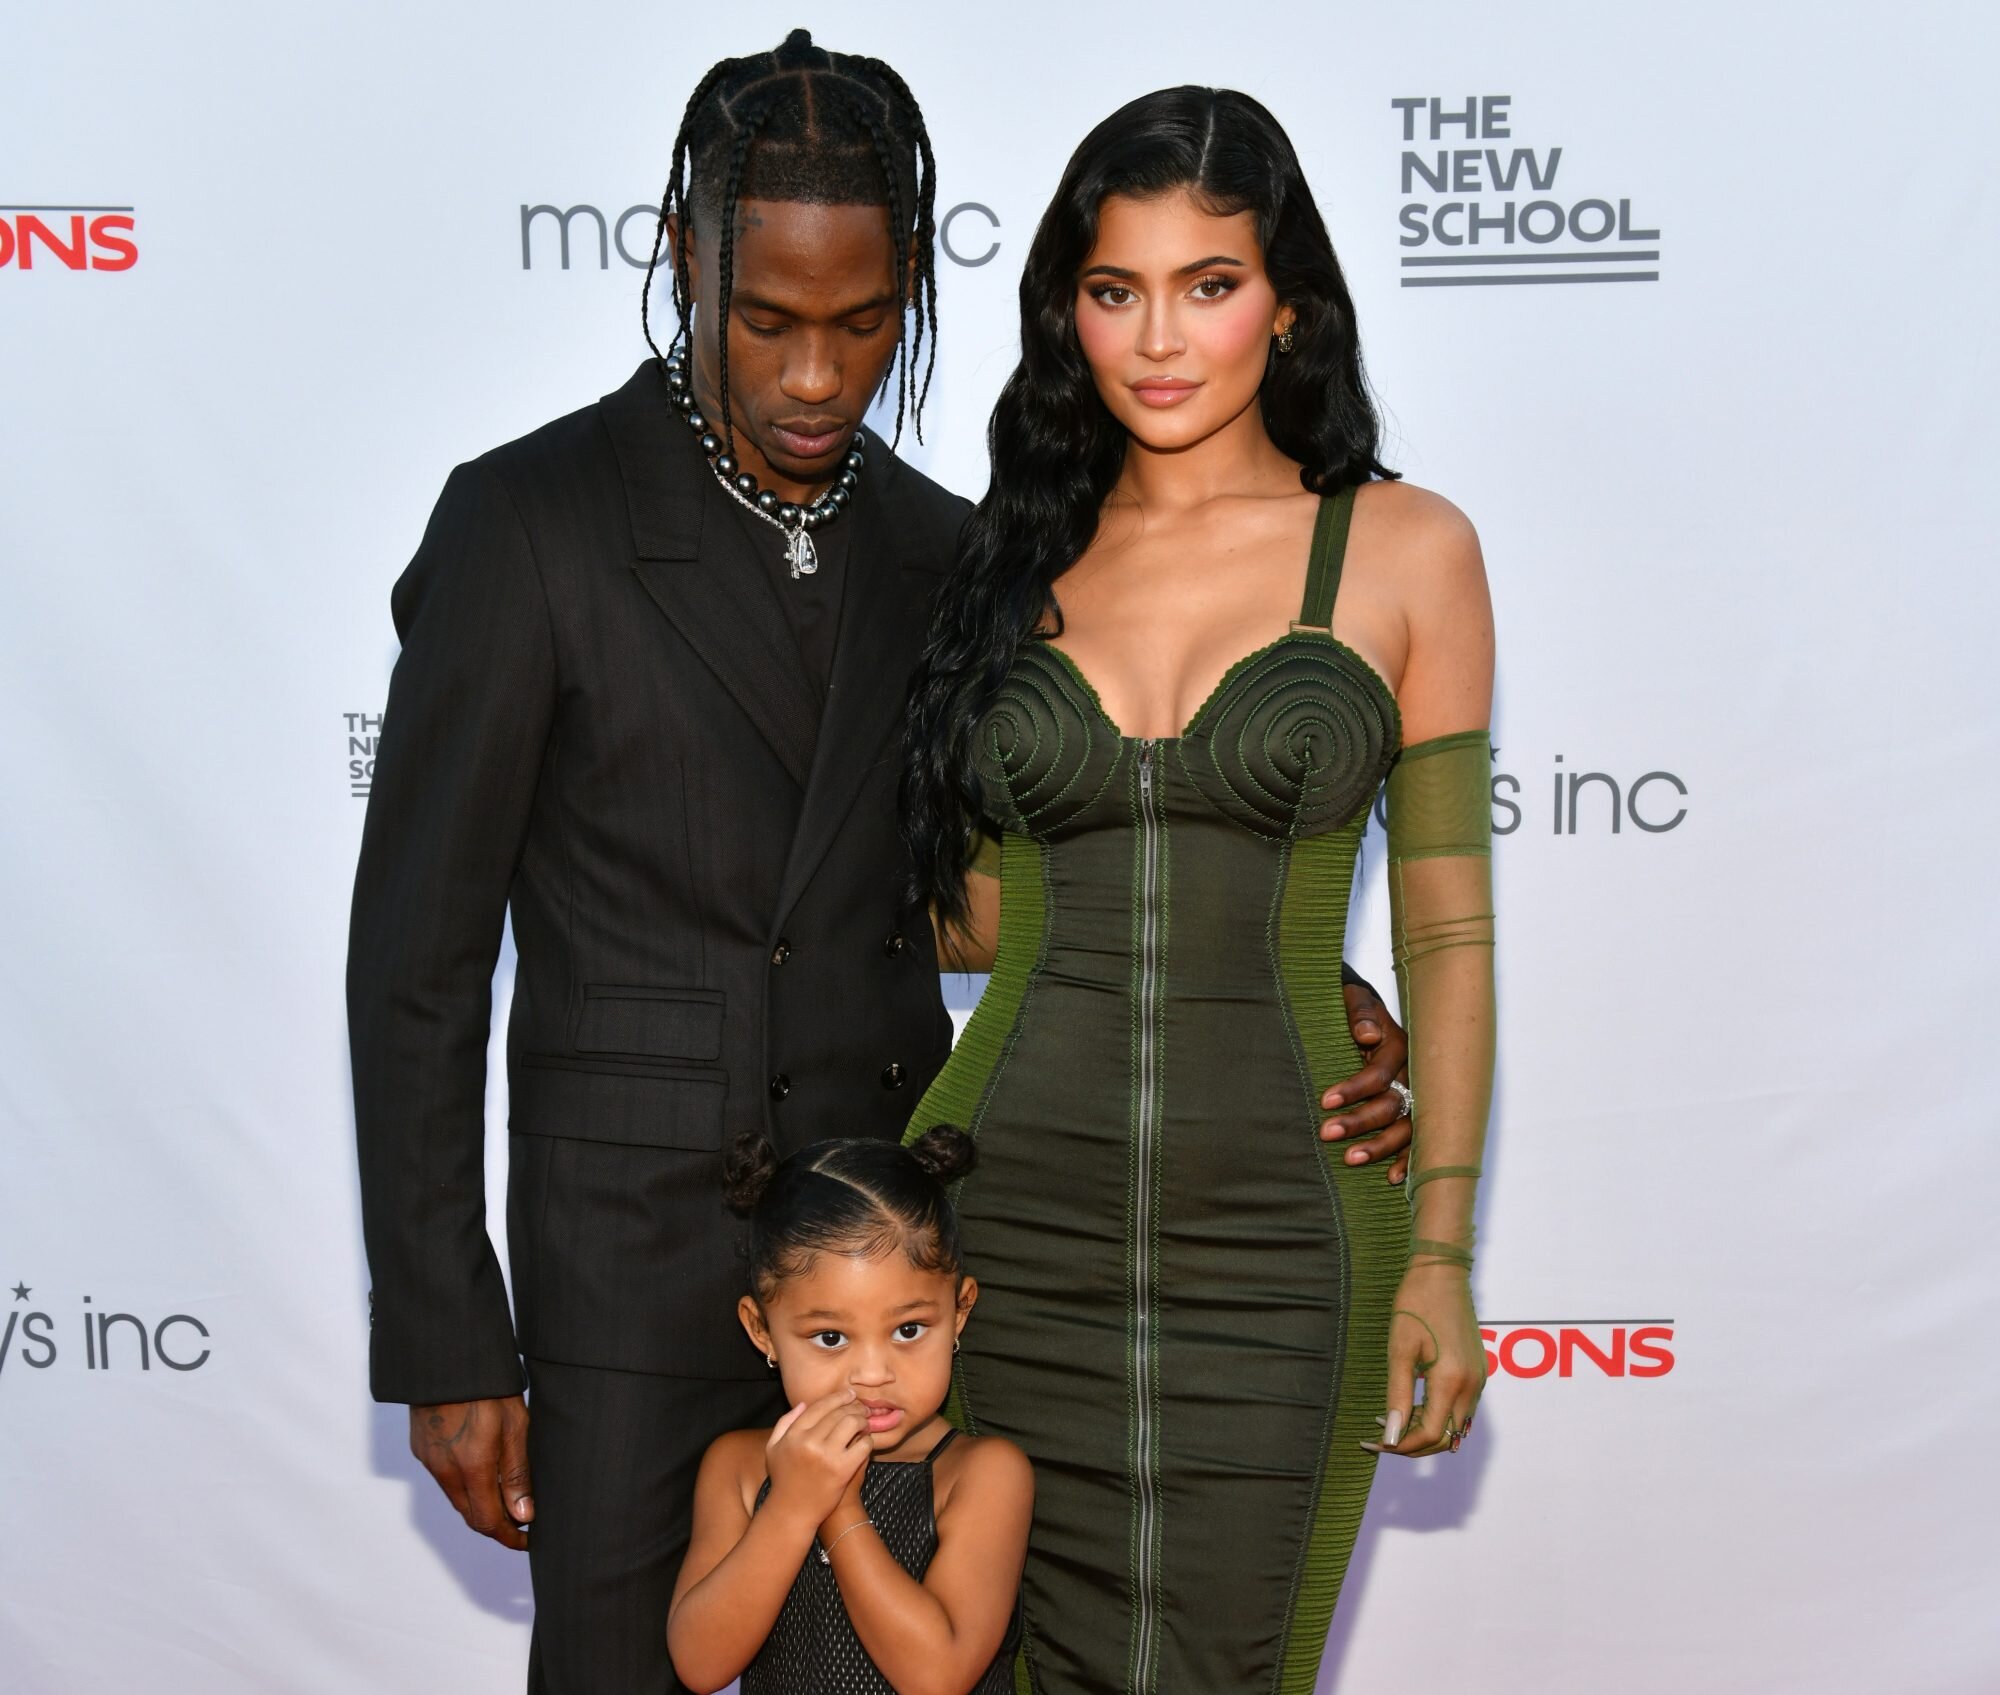 Kylie Jenner to have second child